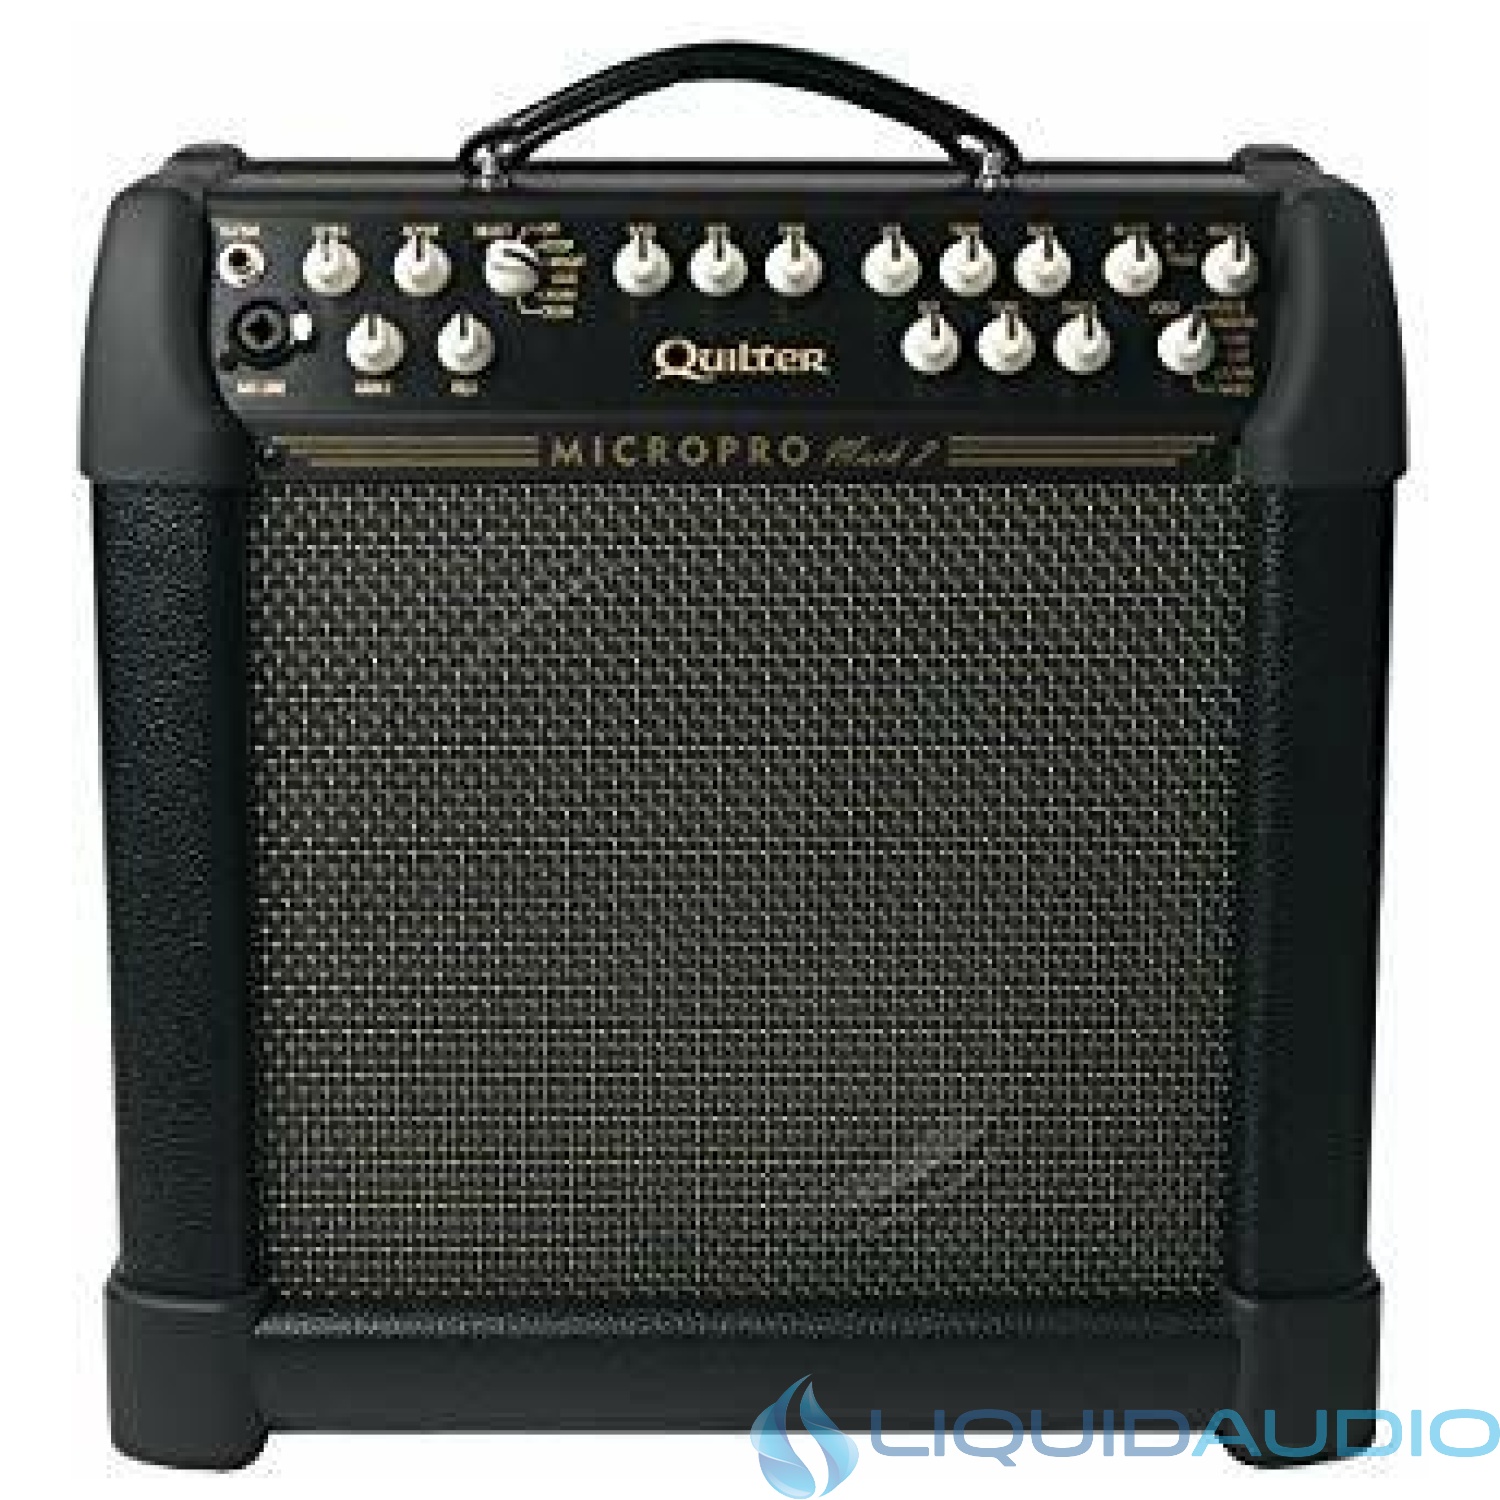 Quilter Micro Pro 200 Mach 2 12 200W 1x12 Guitar Combo Amplifier